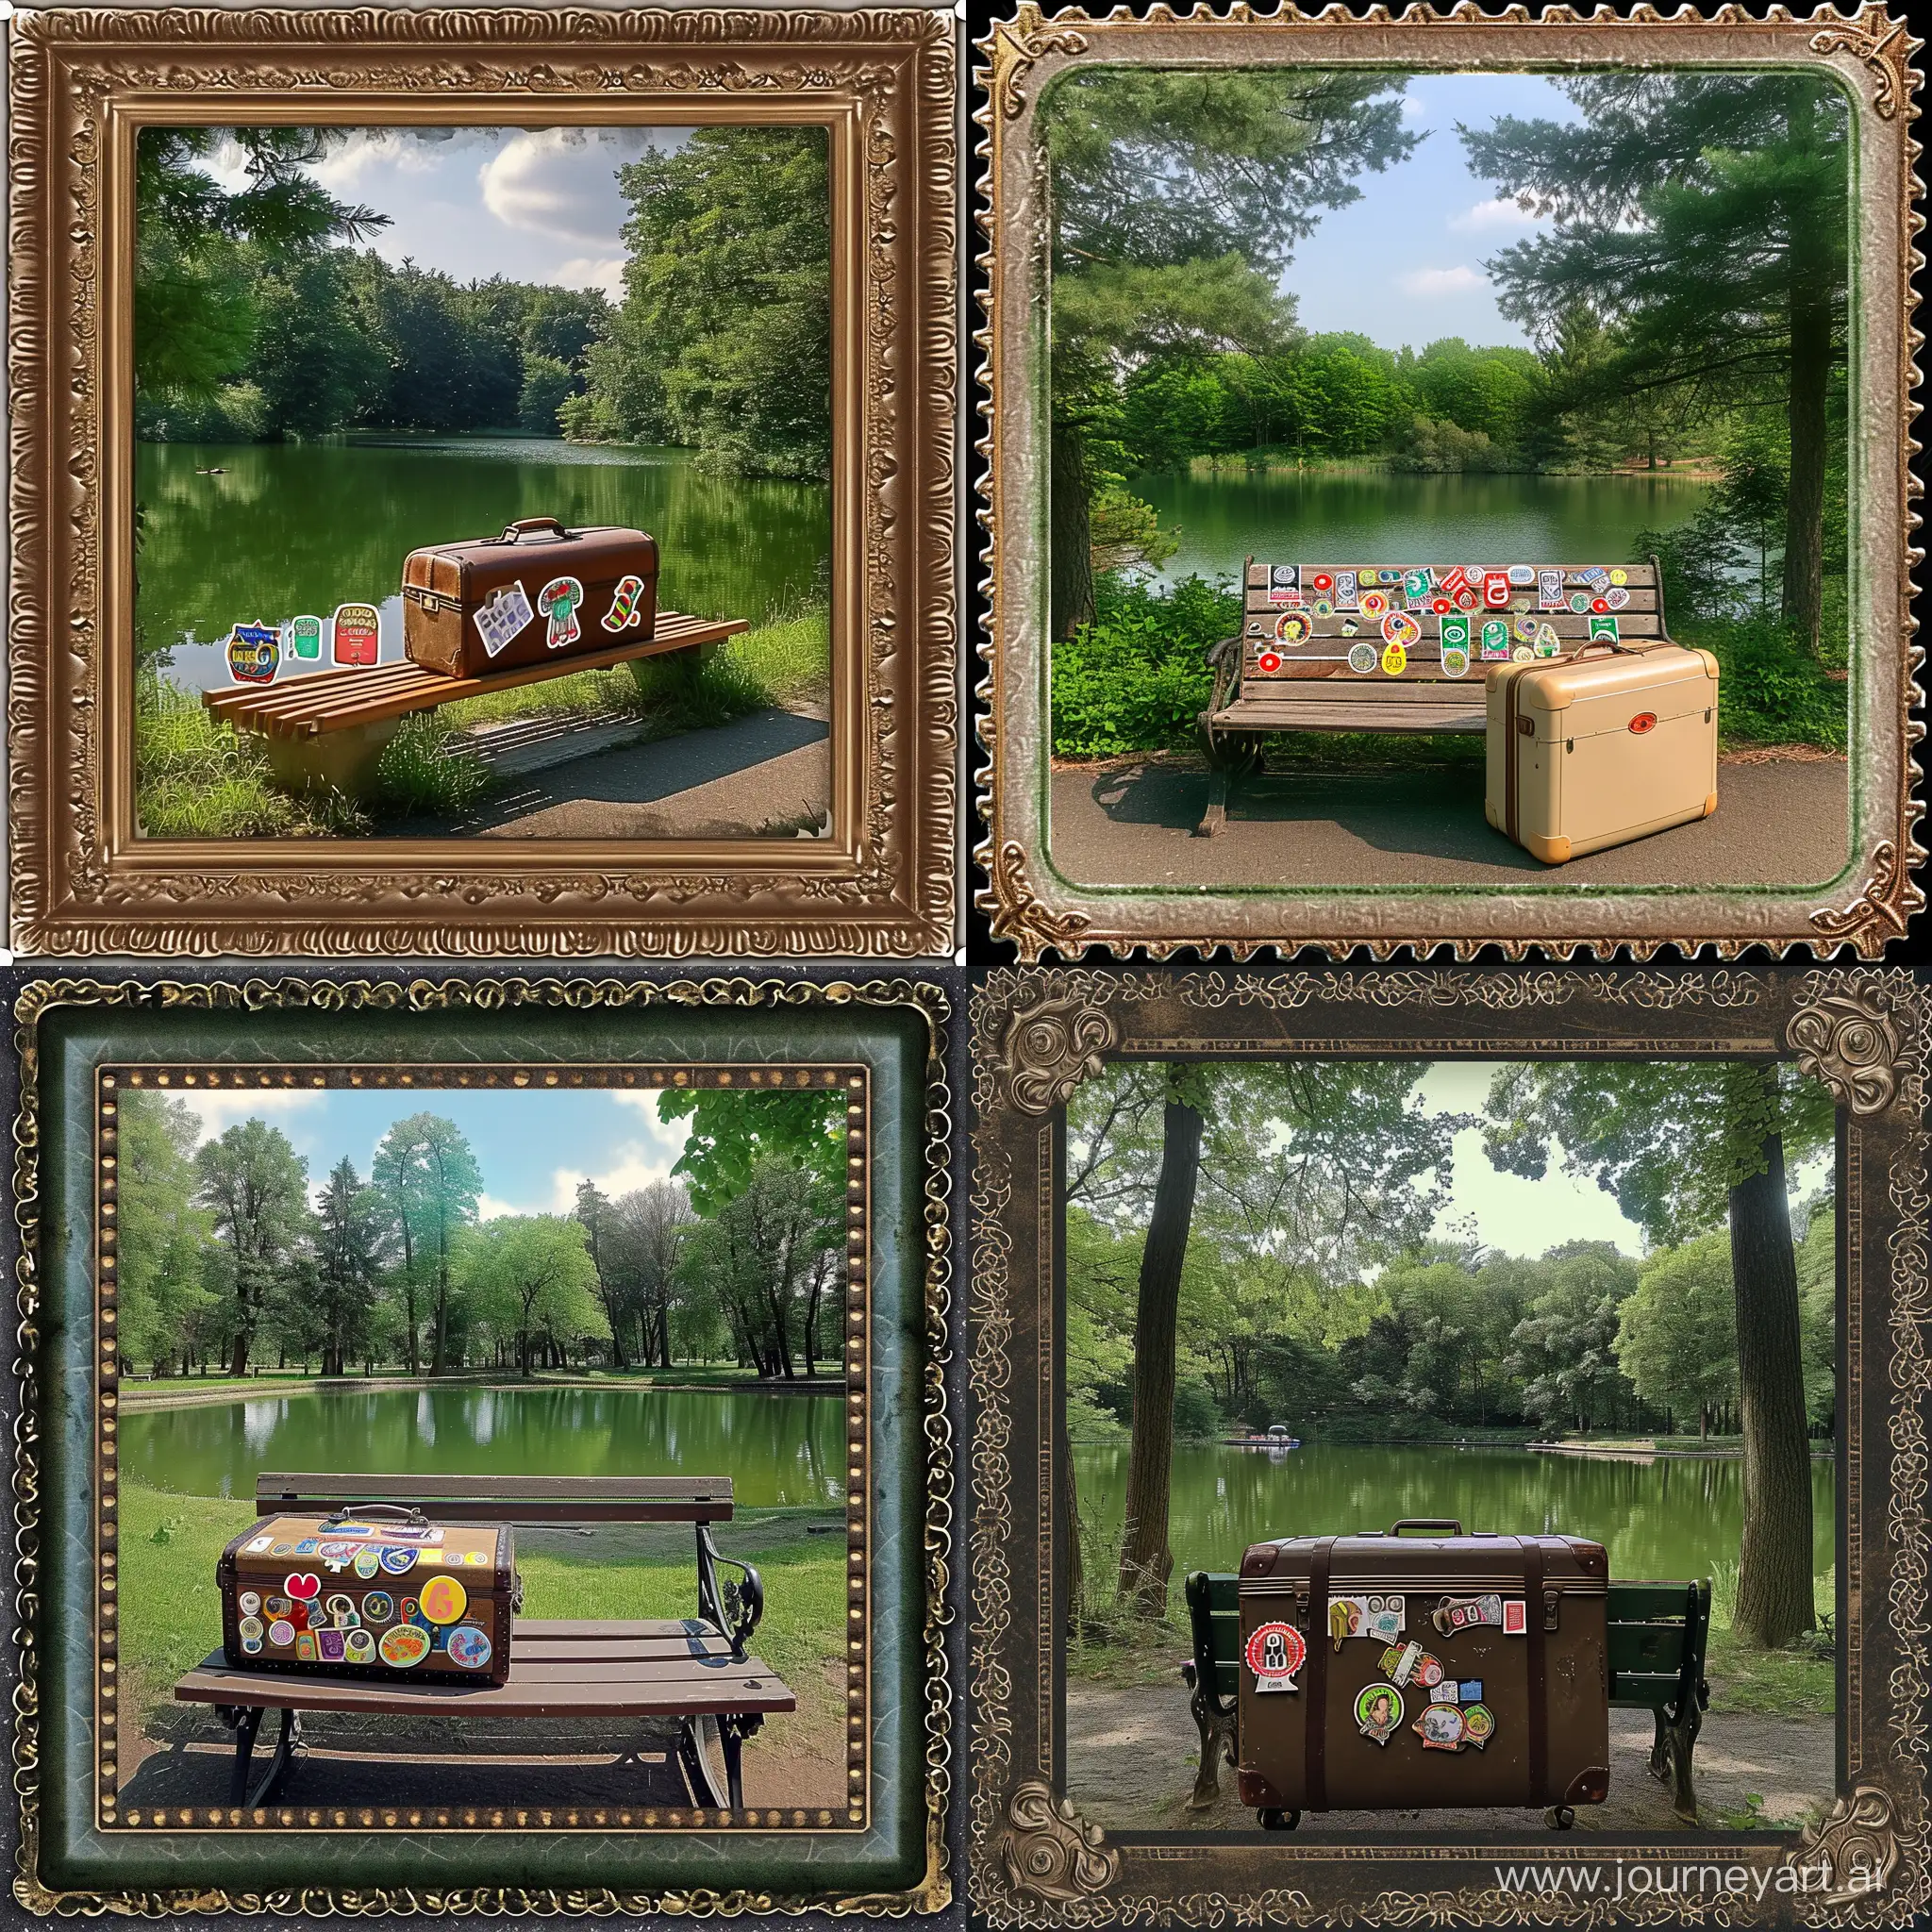 Take photos in the form of a framed postage stamp, it should depict a bench on which lies a suitcase with stickers on it, and in front of a small beautiful lake, green trees around.